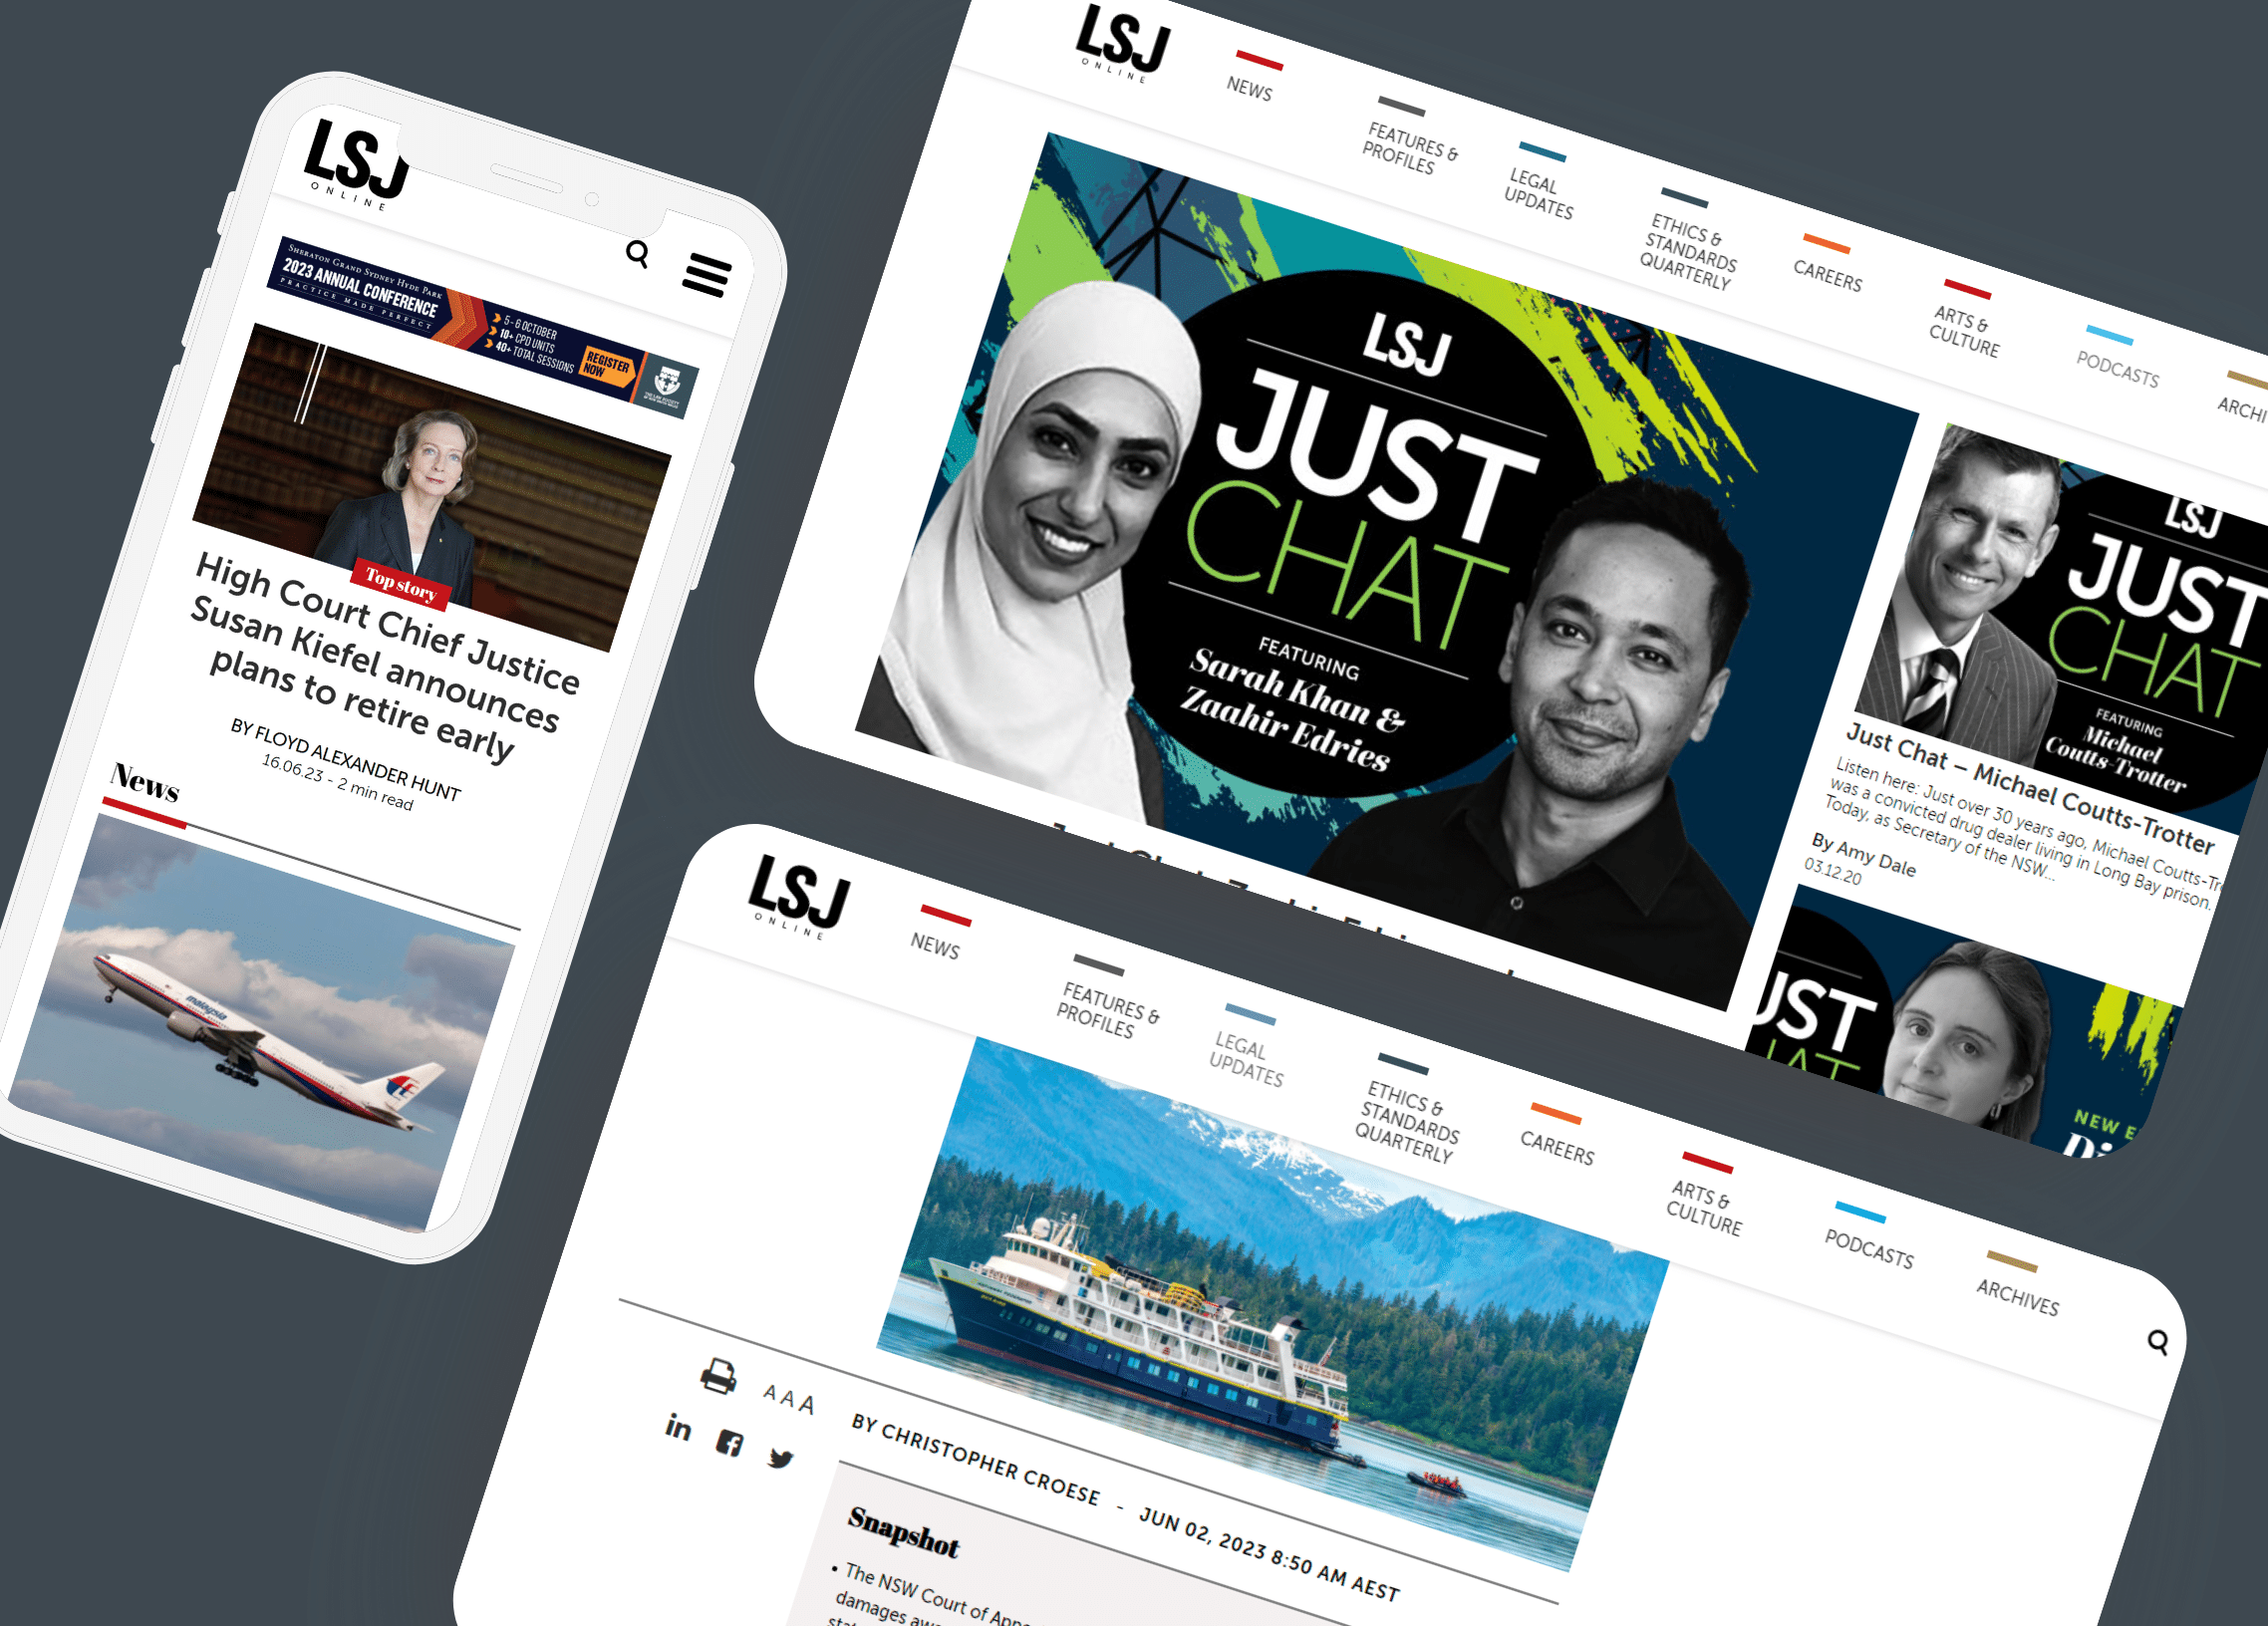 Law Society of NSW Journal Website Redesign: Enhancing Readership and Brand Awareness